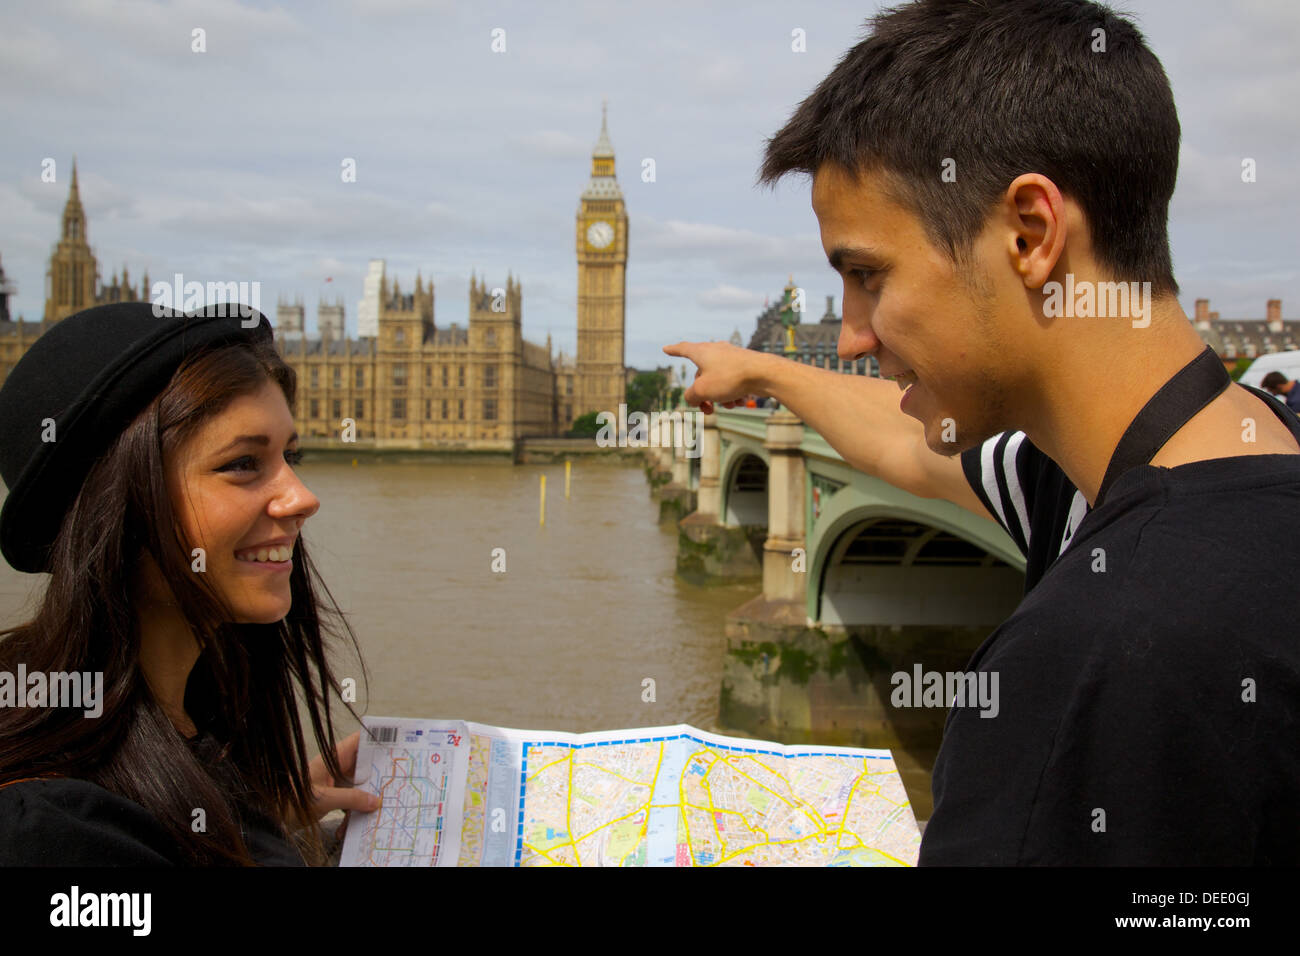 Big Ben and young couple looking at map, London, England, United Kingdom, Europe Stock Photo